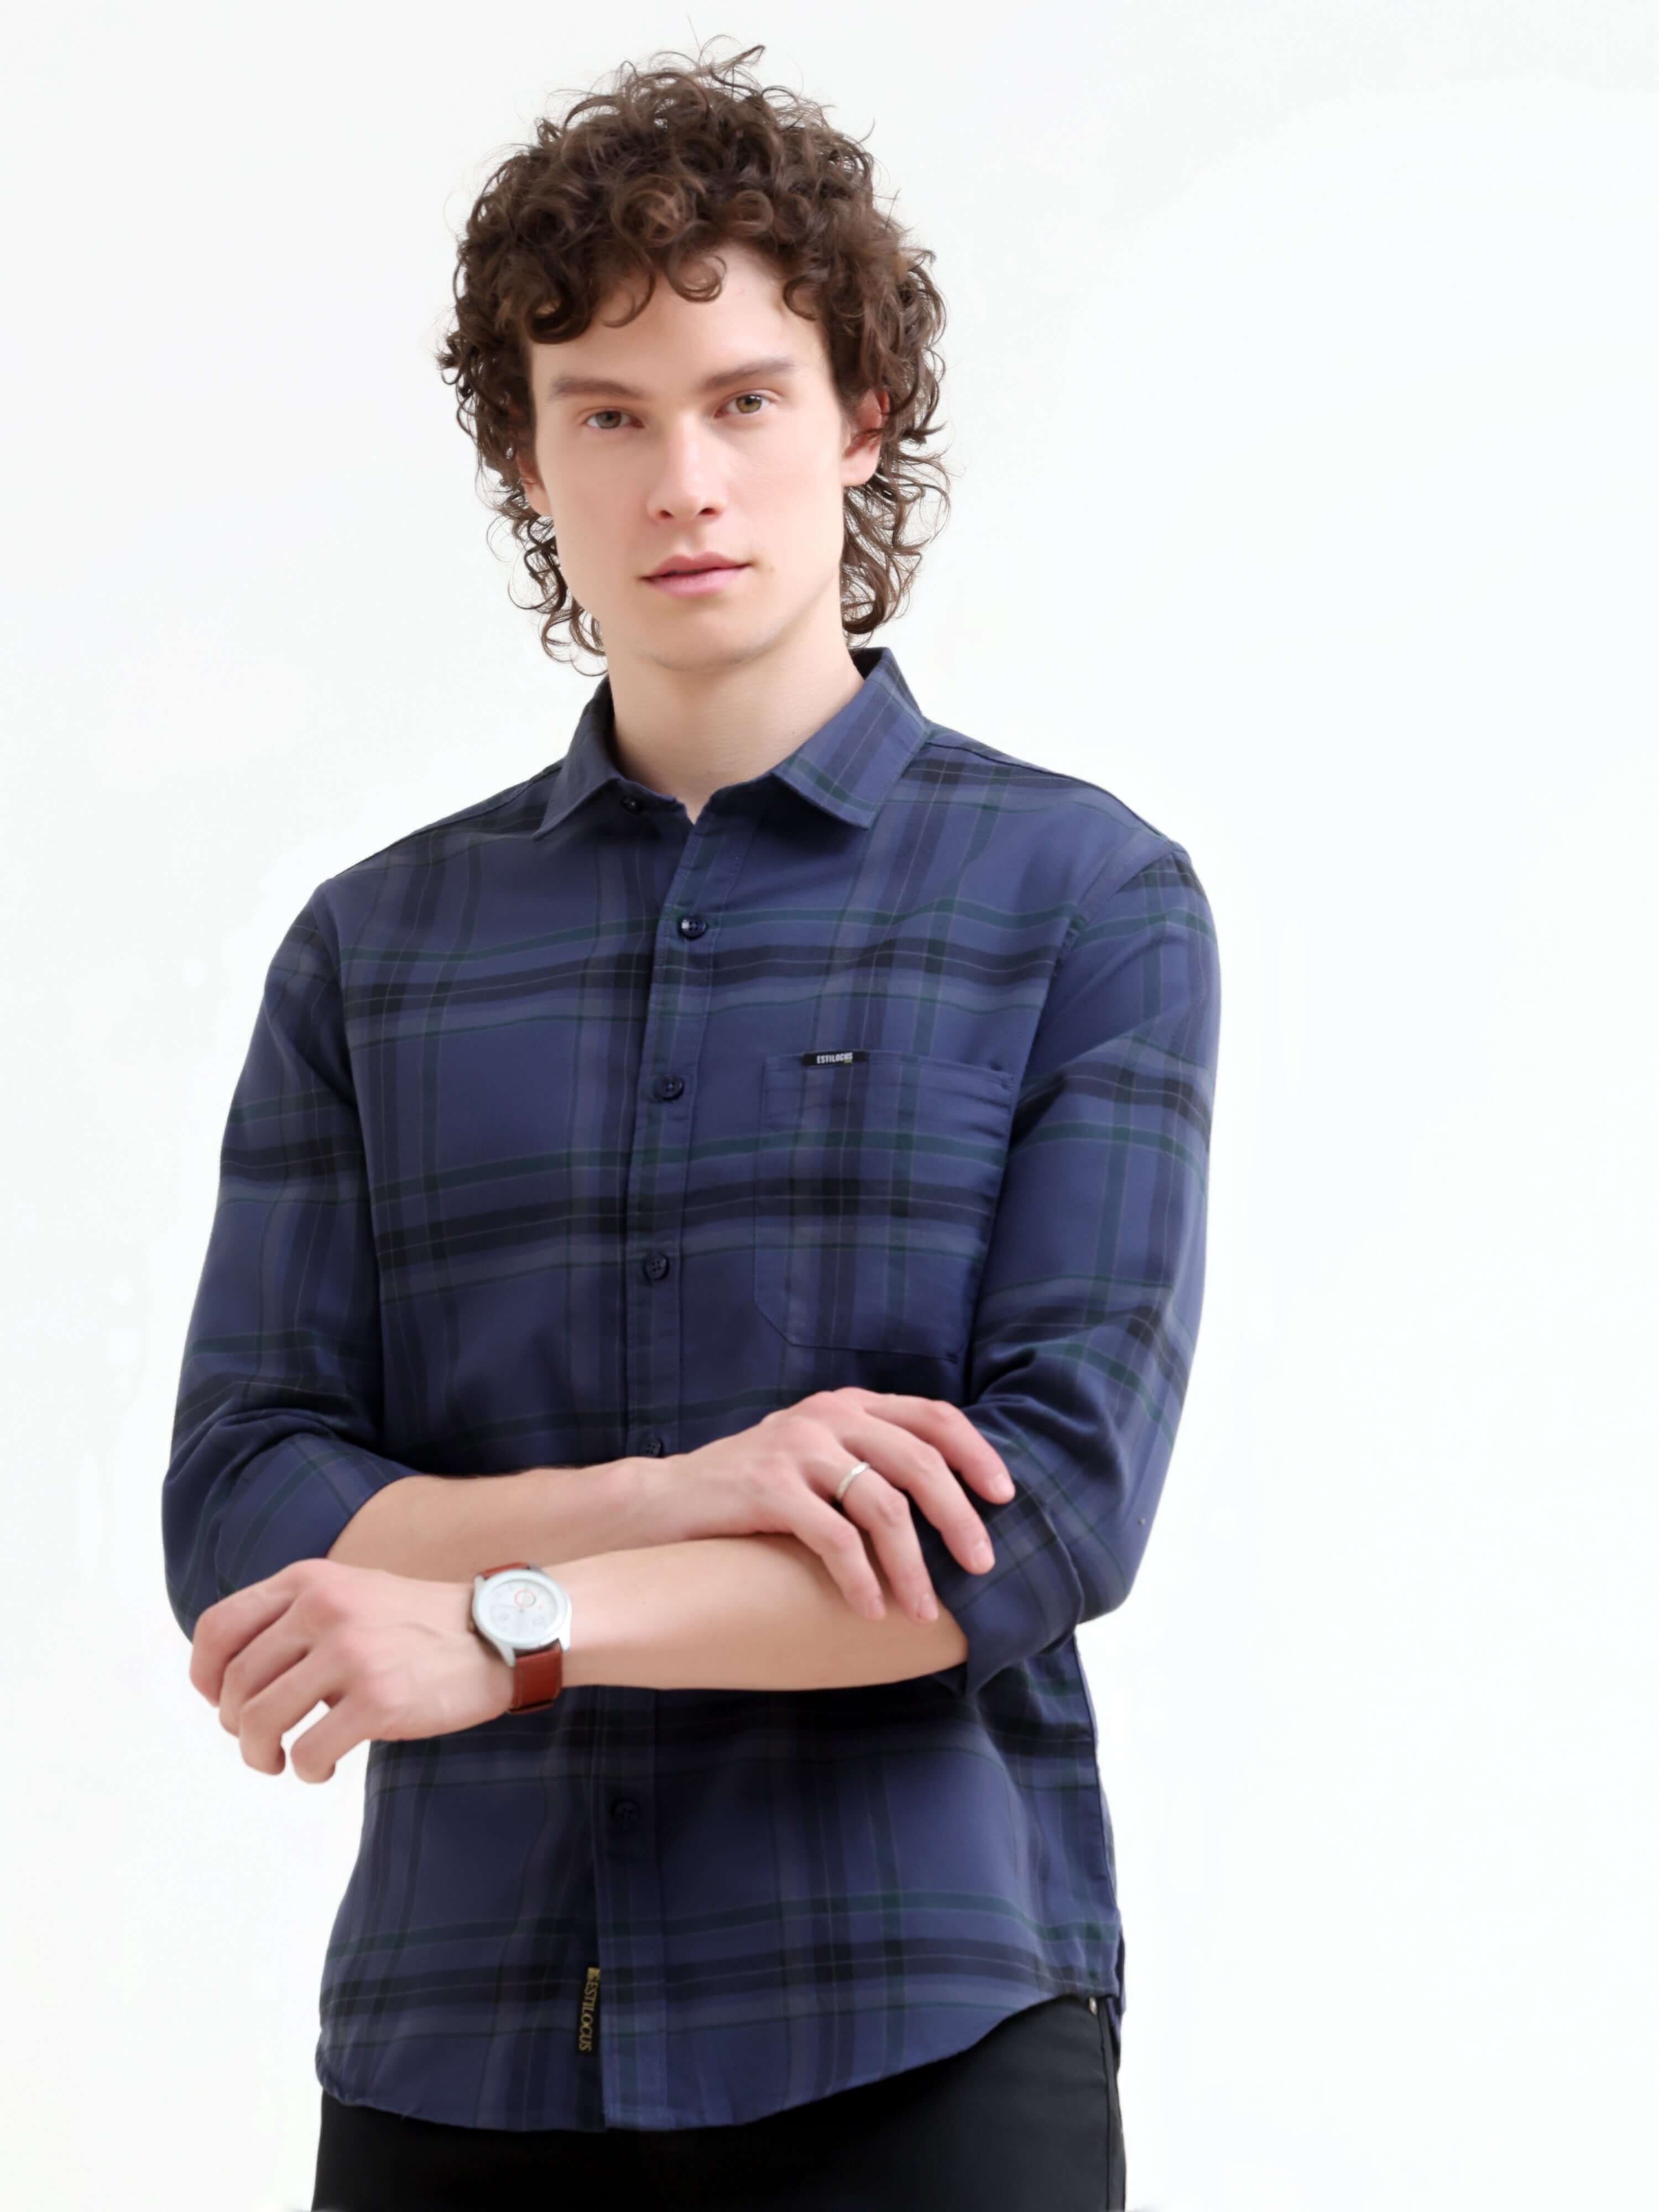 Navy Tonal Check Shirt - Summer New Arrival for Men shop online at Estilocus. Elevate your style with our navy check shirt, perfect for summer. A new arrival that promises a sharp look for any occasion. Shop now!